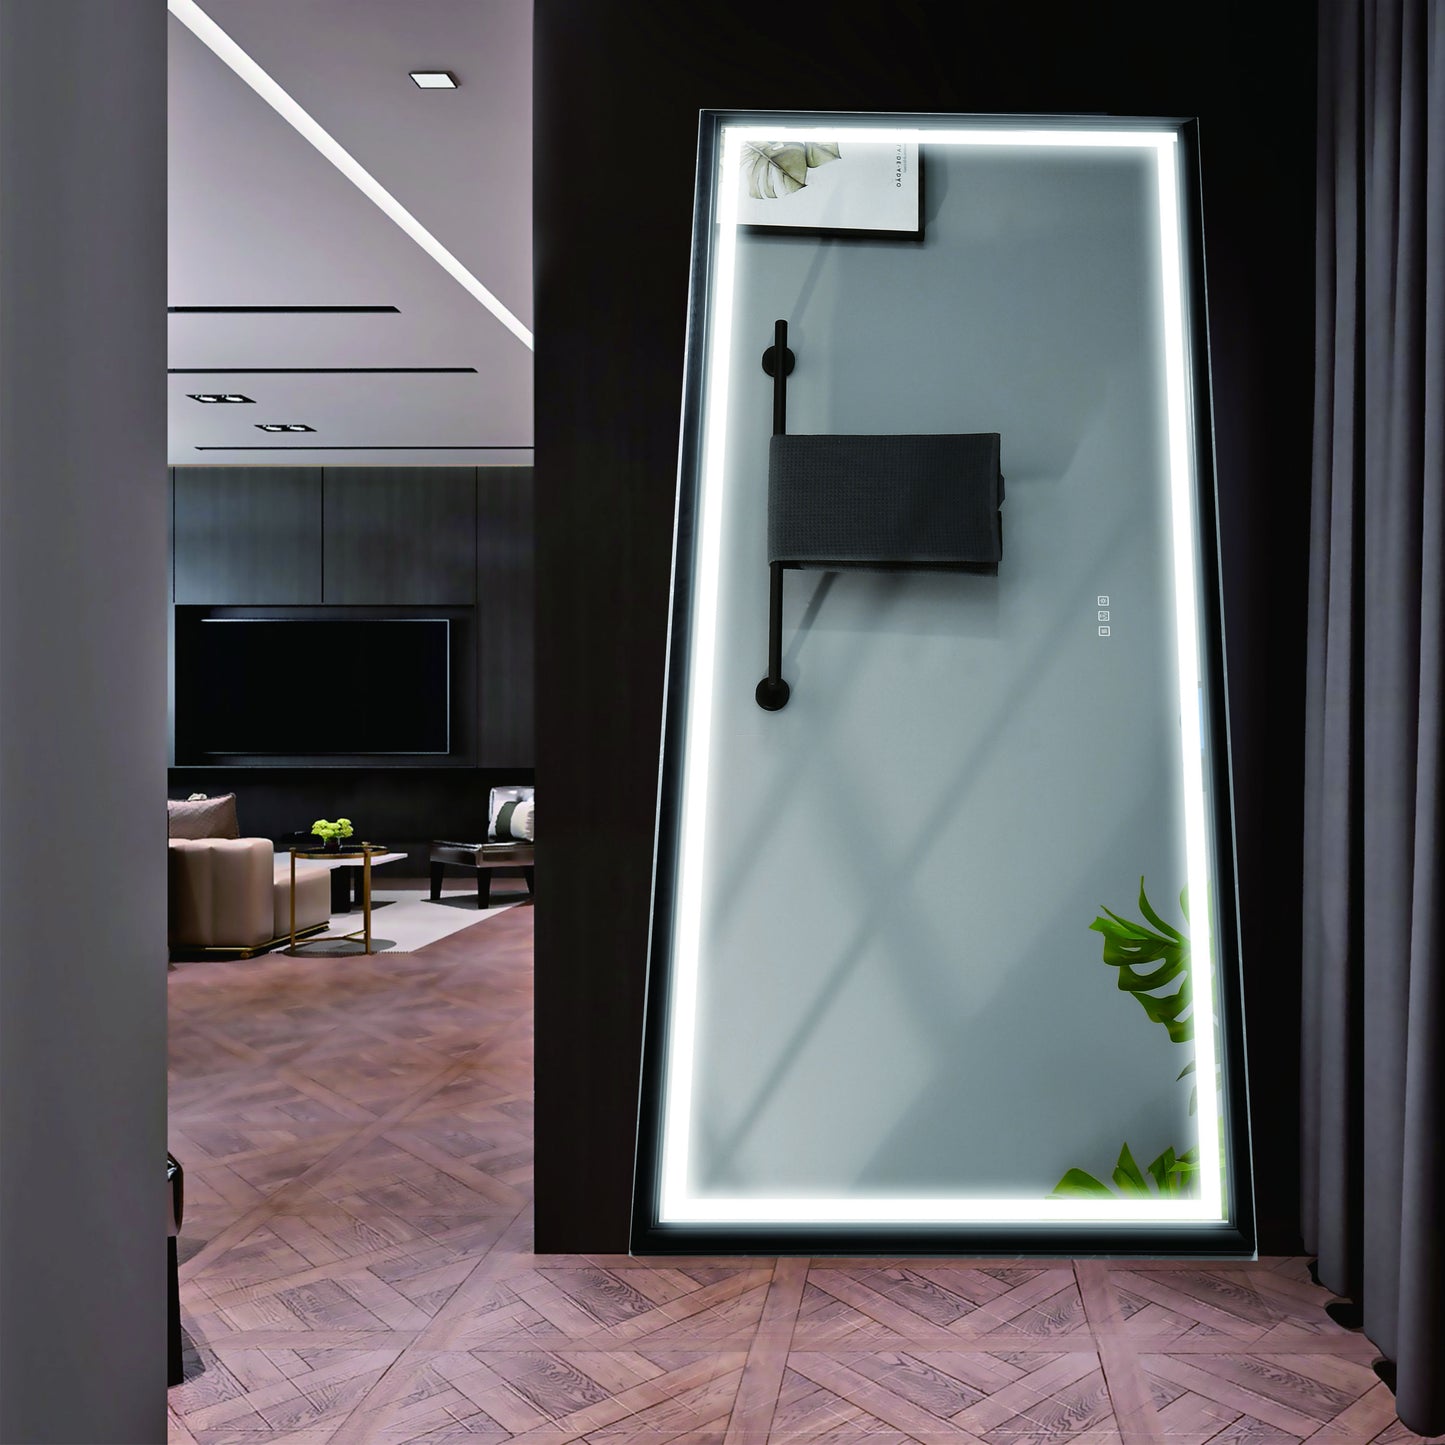 LTL needs to consult the warehouse address88 in. W x 38 in. H Oversized Rectangular Black Framed LED Mirror Anti-Fog Dimmable Wall Mount Bathroom Vanity Mirror  Wall Mirror